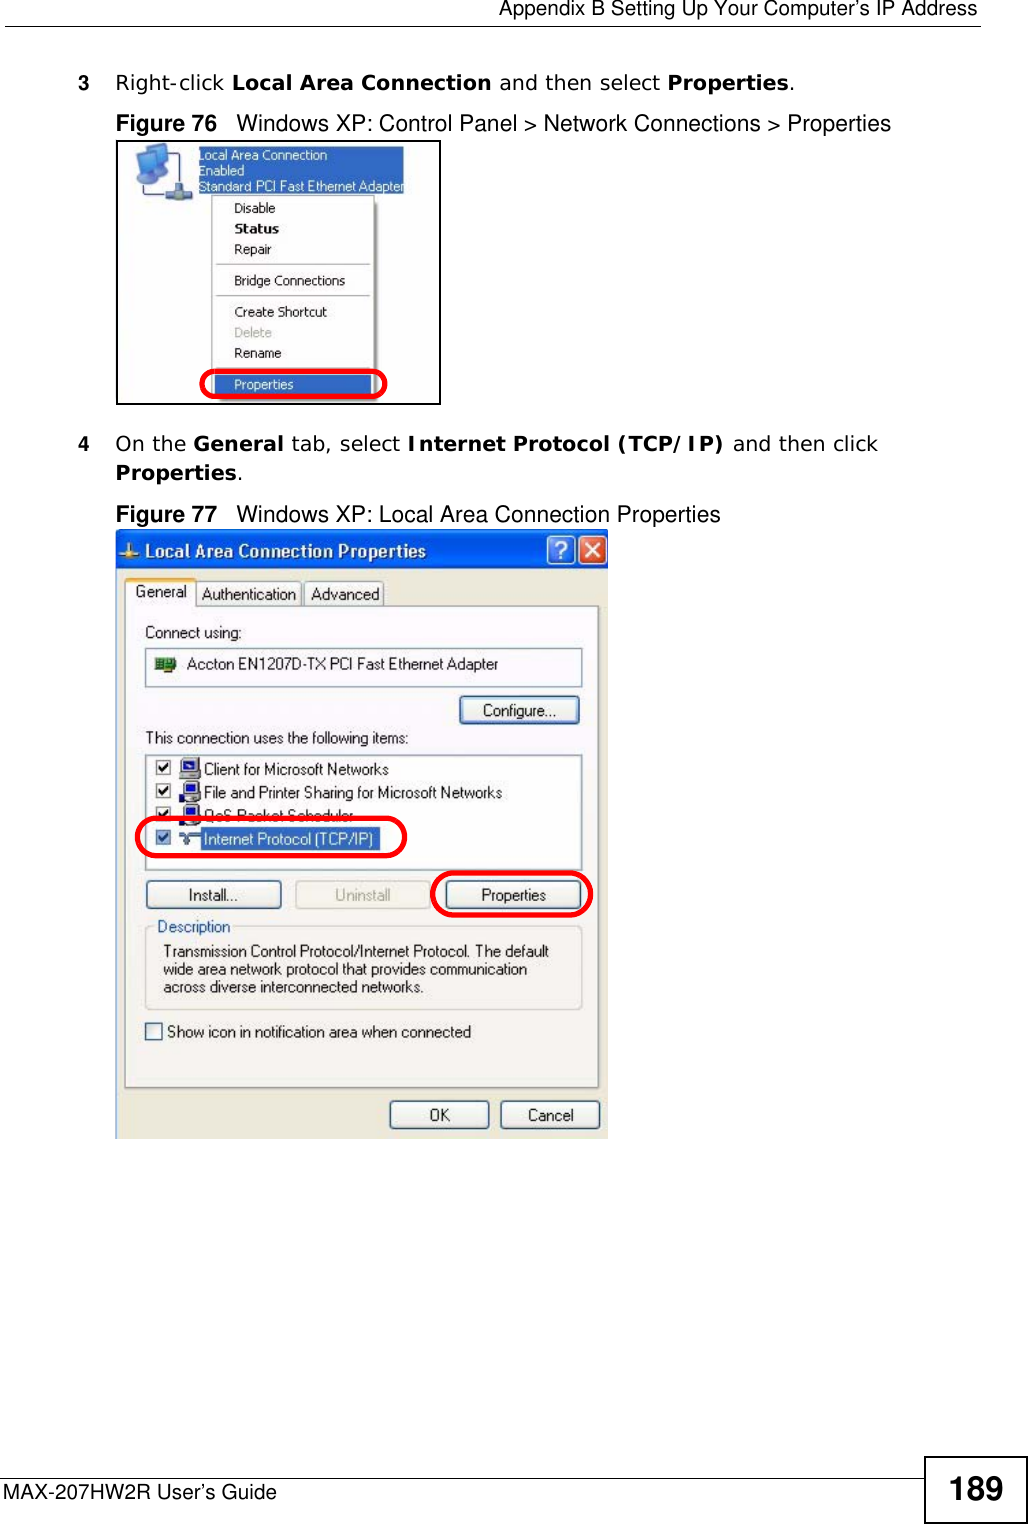  Appendix B Setting Up Your Computer’s IP AddressMAX-207HW2R User’s Guide 1893Right-click Local Area Connection and then select Properties.Figure 76   Windows XP: Control Panel &gt; Network Connections &gt; Properties4On the General tab, select Internet Protocol (TCP/IP) and then click Properties.Figure 77   Windows XP: Local Area Connection Properties